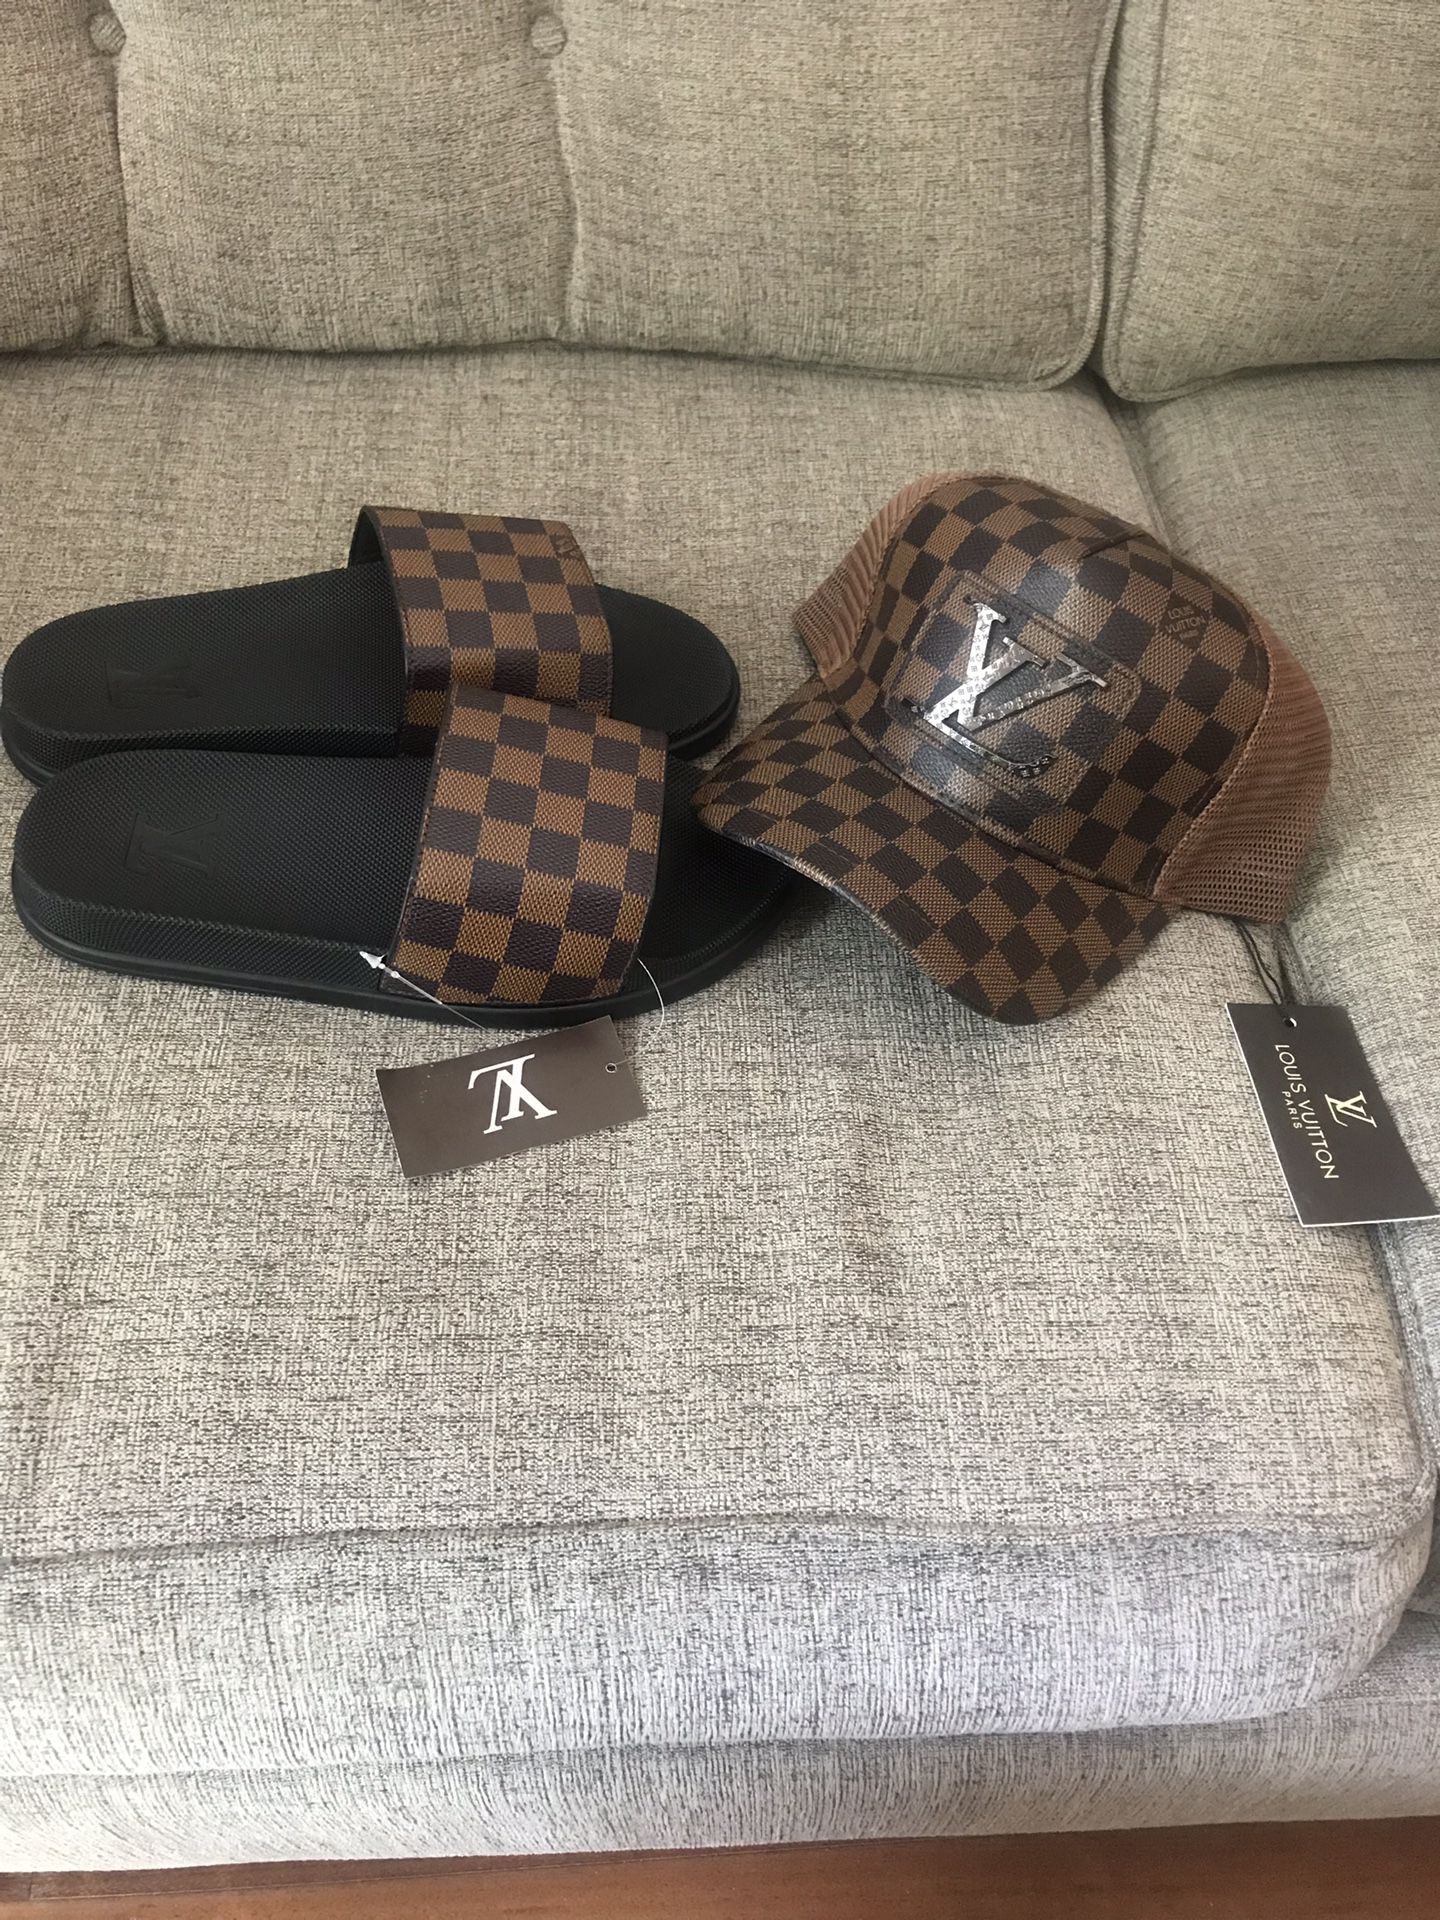 Louis Vuitton Slippers and Hat Set for Sale in Tampa, FL - OfferUp